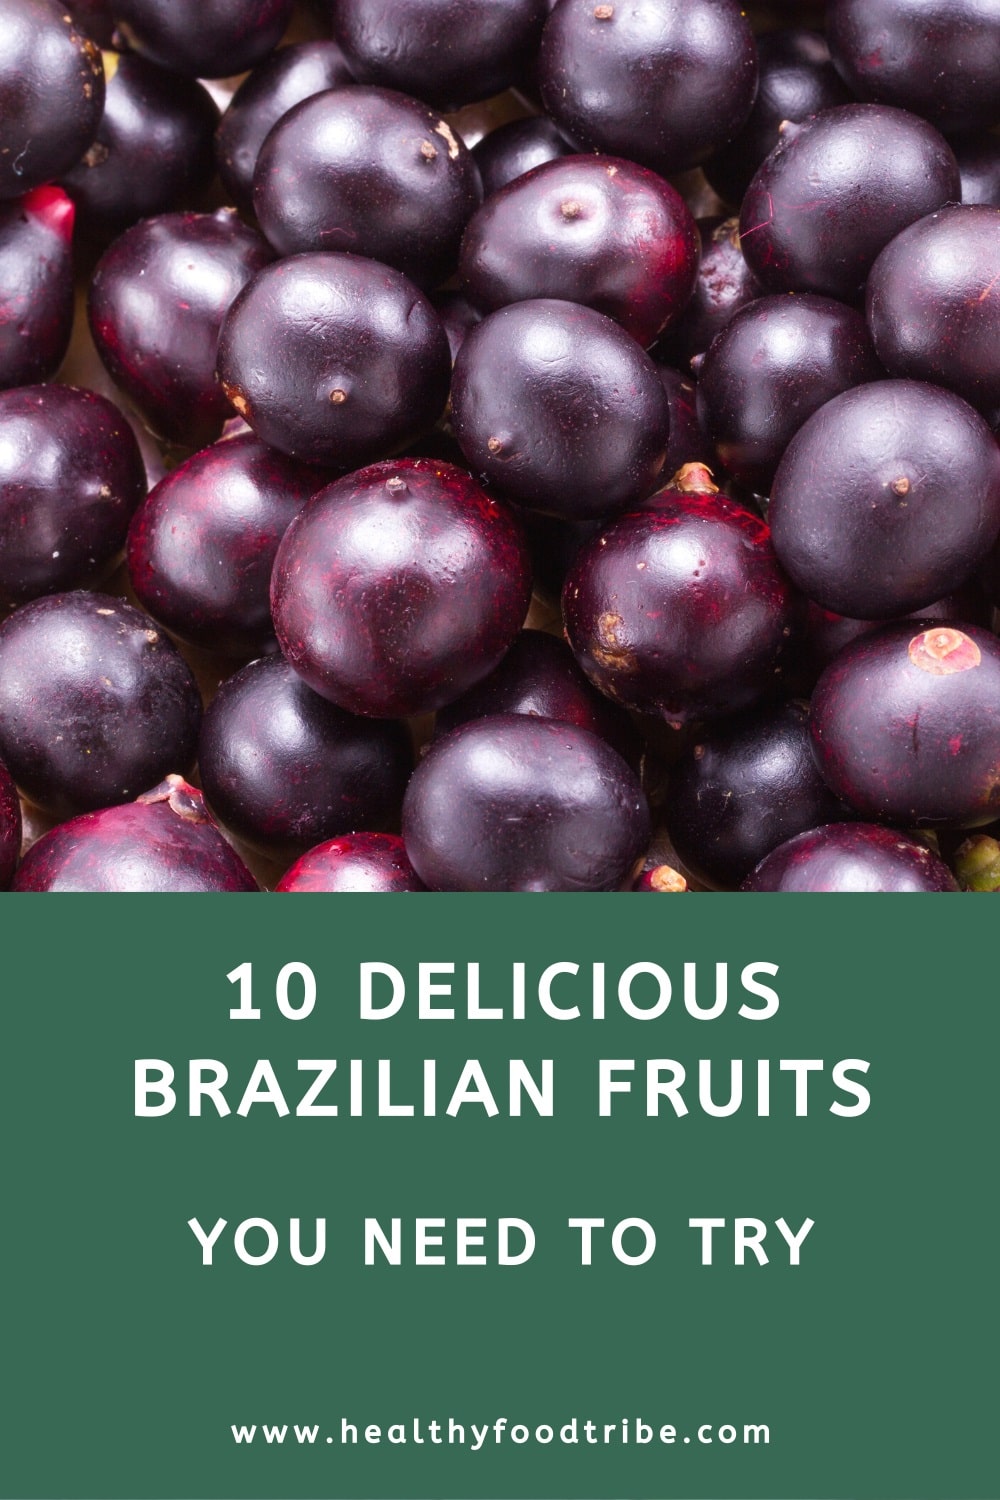 10 Delicious Brazilian fruits you need to try